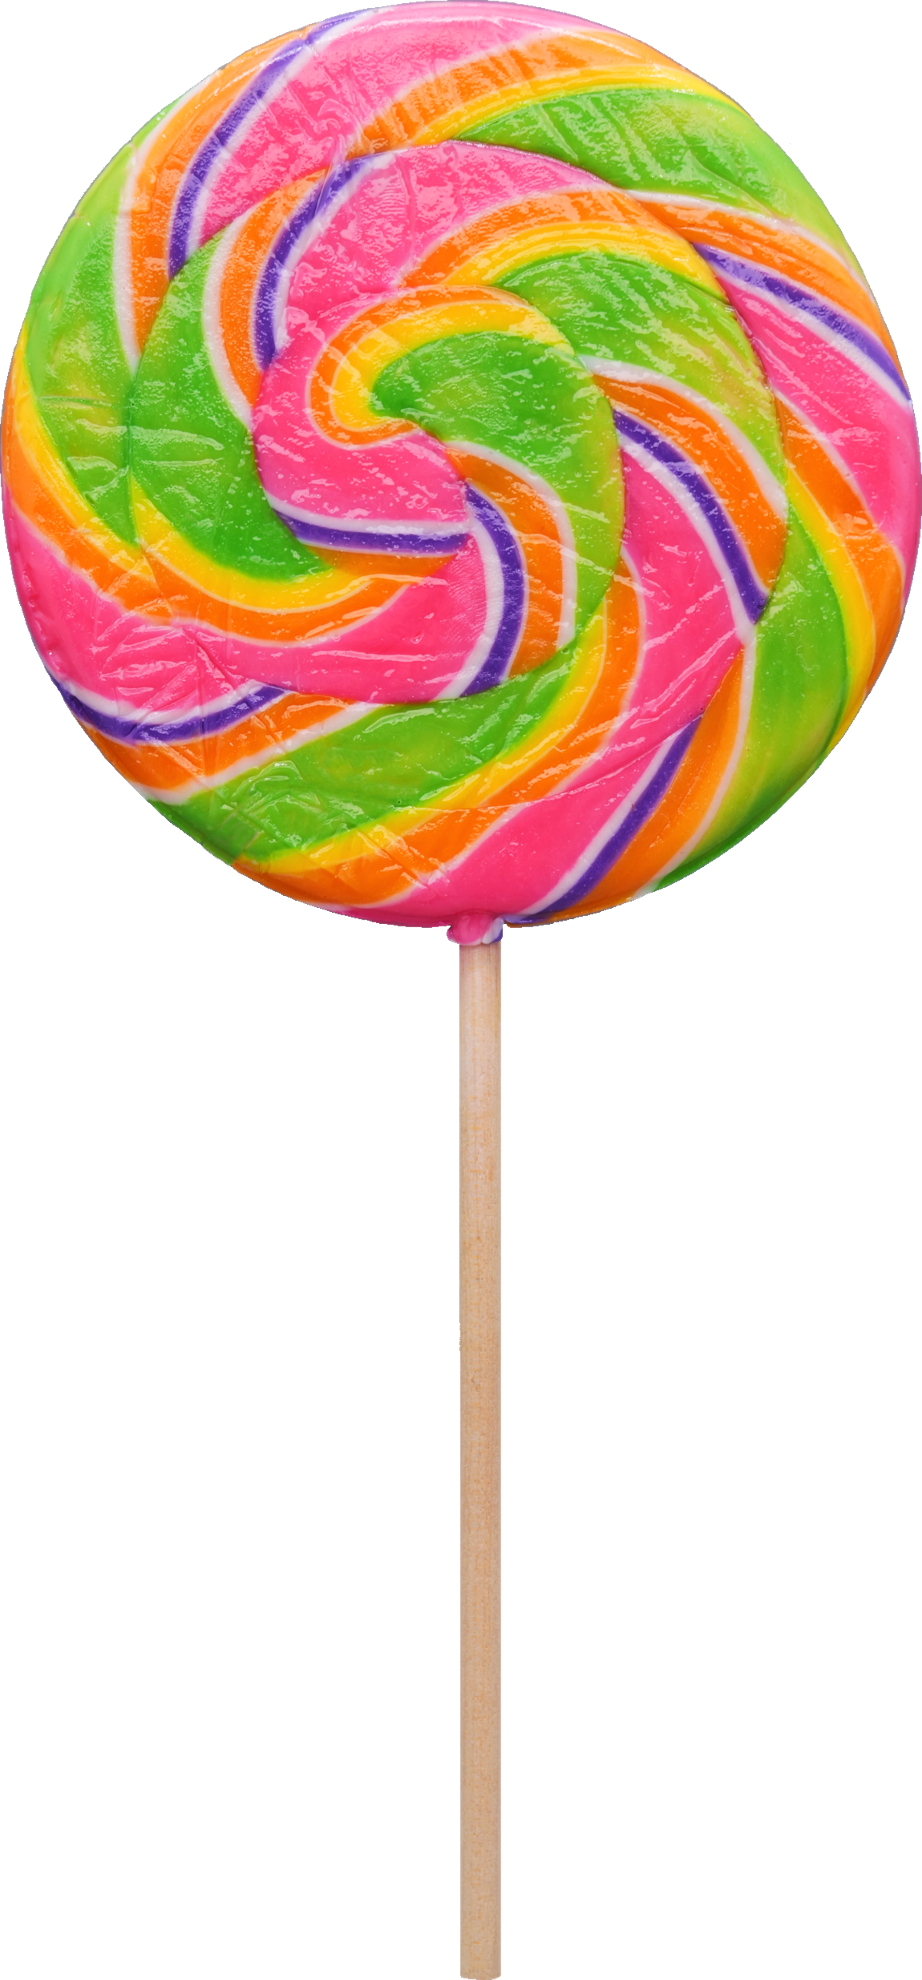 Picture of a large lollipop, or hard candy on a stick, called an all-day sucker.